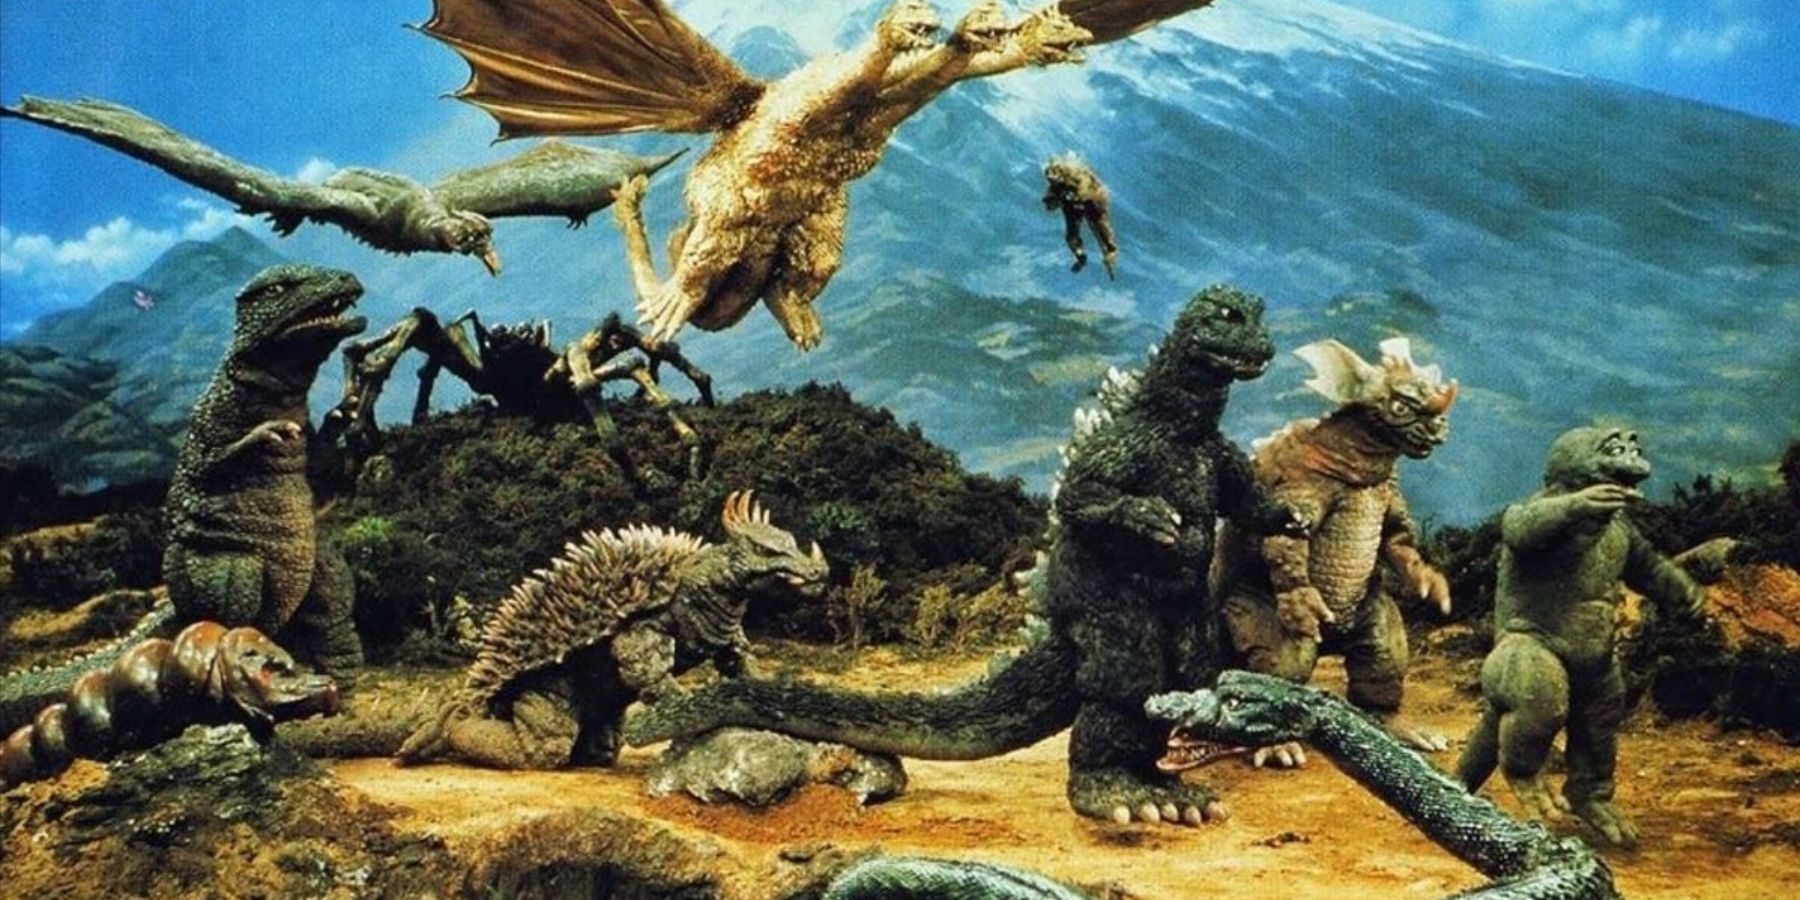 DESTROY ALL MONSTERS (1968)